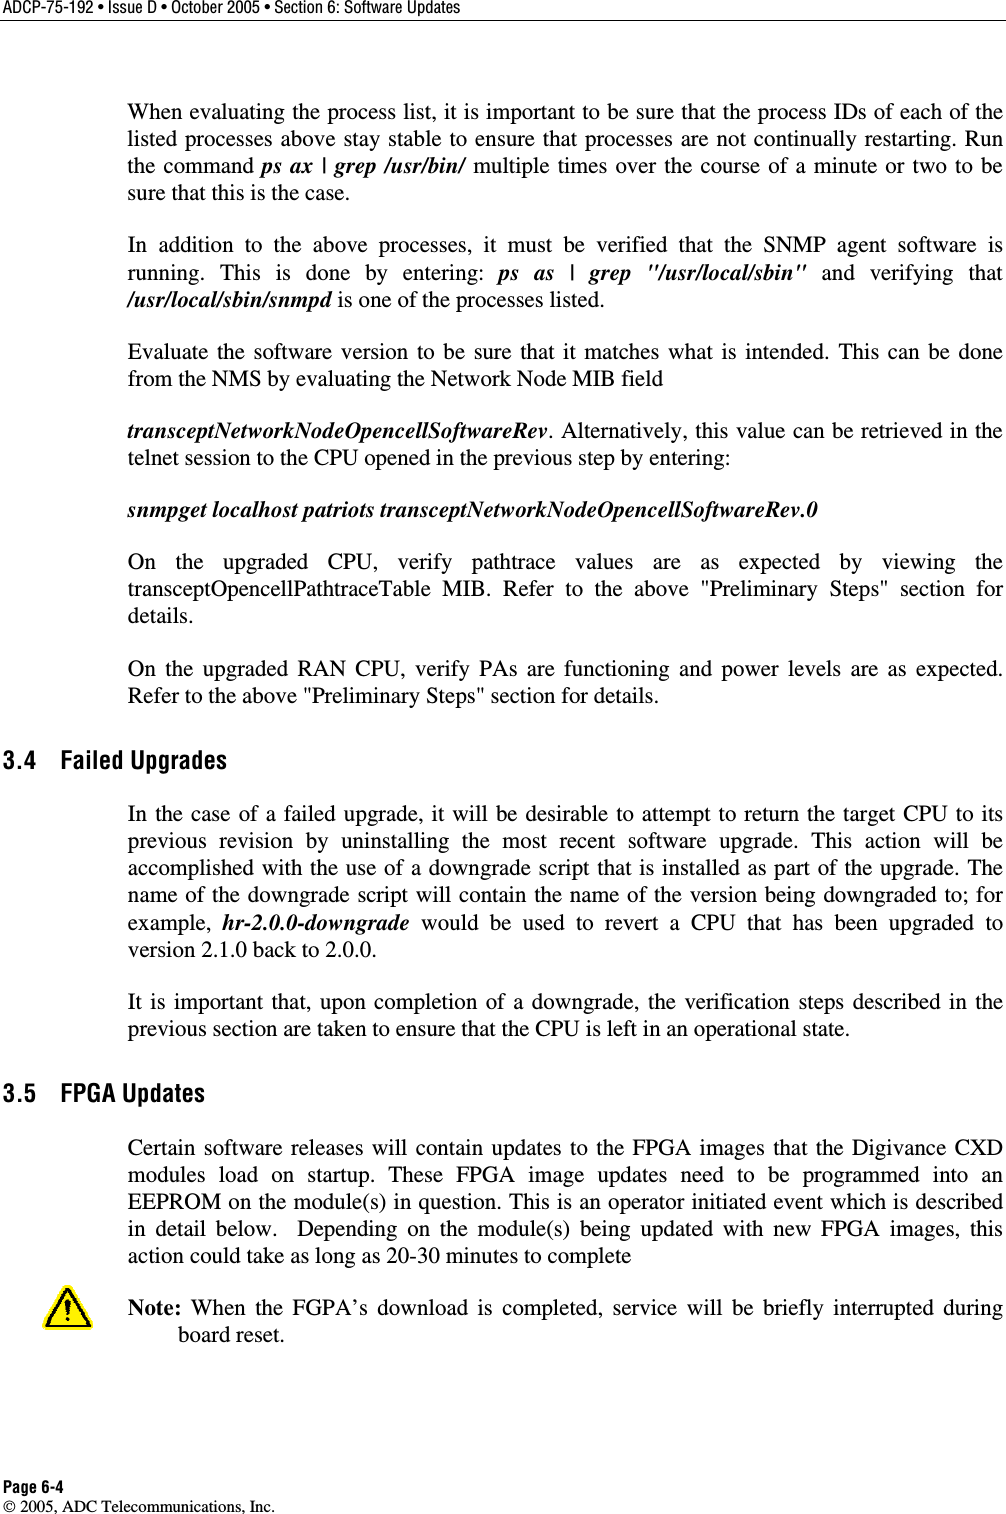 ADCP-75-192 • Issue D • October 2005 • Section 6: Software Updates Page 6-4  2005, ADC Telecommunications, Inc. When evaluating the process list, it is important to be sure that the process IDs of each of the listed processes above stay stable to ensure that processes are not continually restarting. Run the command ps ax | grep /usr/bin/ multiple times over the course of a minute or two to be sure that this is the case. In addition to the above processes, it must be verified that the SNMP agent software is running. This is done by entering: ps as | grep &quot;/usr/local/sbin&quot; and verifying that /usr/local/sbin/snmpd is one of the processes listed. Evaluate the software version to be sure that it matches what is intended. This can be done from the NMS by evaluating the Network Node MIB field  transceptNetworkNodeOpencellSoftwareRev. Alternatively, this value can be retrieved in the telnet session to the CPU opened in the previous step by entering:  snmpget localhost patriots transceptNetworkNodeOpencellSoftwareRev.0 On the upgraded CPU, verify pathtrace values are as expected by viewing the transceptOpencellPathtraceTable MIB. Refer to the above &quot;Preliminary Steps&quot; section for details. On the upgraded RAN CPU, verify PAs are functioning and power levels are as expected. Refer to the above &quot;Preliminary Steps&quot; section for details. 3.4 Failed Upgrades In the case of a failed upgrade, it will be desirable to attempt to return the target CPU to its previous revision by uninstalling the most recent software upgrade. This action will be accomplished with the use of a downgrade script that is installed as part of the upgrade. The name of the downgrade script will contain the name of the version being downgraded to; for example,  hr-2.0.0-downgrade would be used to revert a CPU that has been upgraded to version 2.1.0 back to 2.0.0.  It is important that, upon completion of a downgrade, the verification steps described in the previous section are taken to ensure that the CPU is left in an operational state. 3.5 FPGA Updates Certain software releases will contain updates to the FPGA images that the Digivance CXD modules load on startup. These FPGA image updates need to be programmed into an EEPROM on the module(s) in question. This is an operator initiated event which is described in detail below.  Depending on the module(s) being updated with new FPGA images, this action could take as long as 20-30 minutes to complete Note: When the FGPA’s download is completed, service will be briefly interrupted during board reset. 